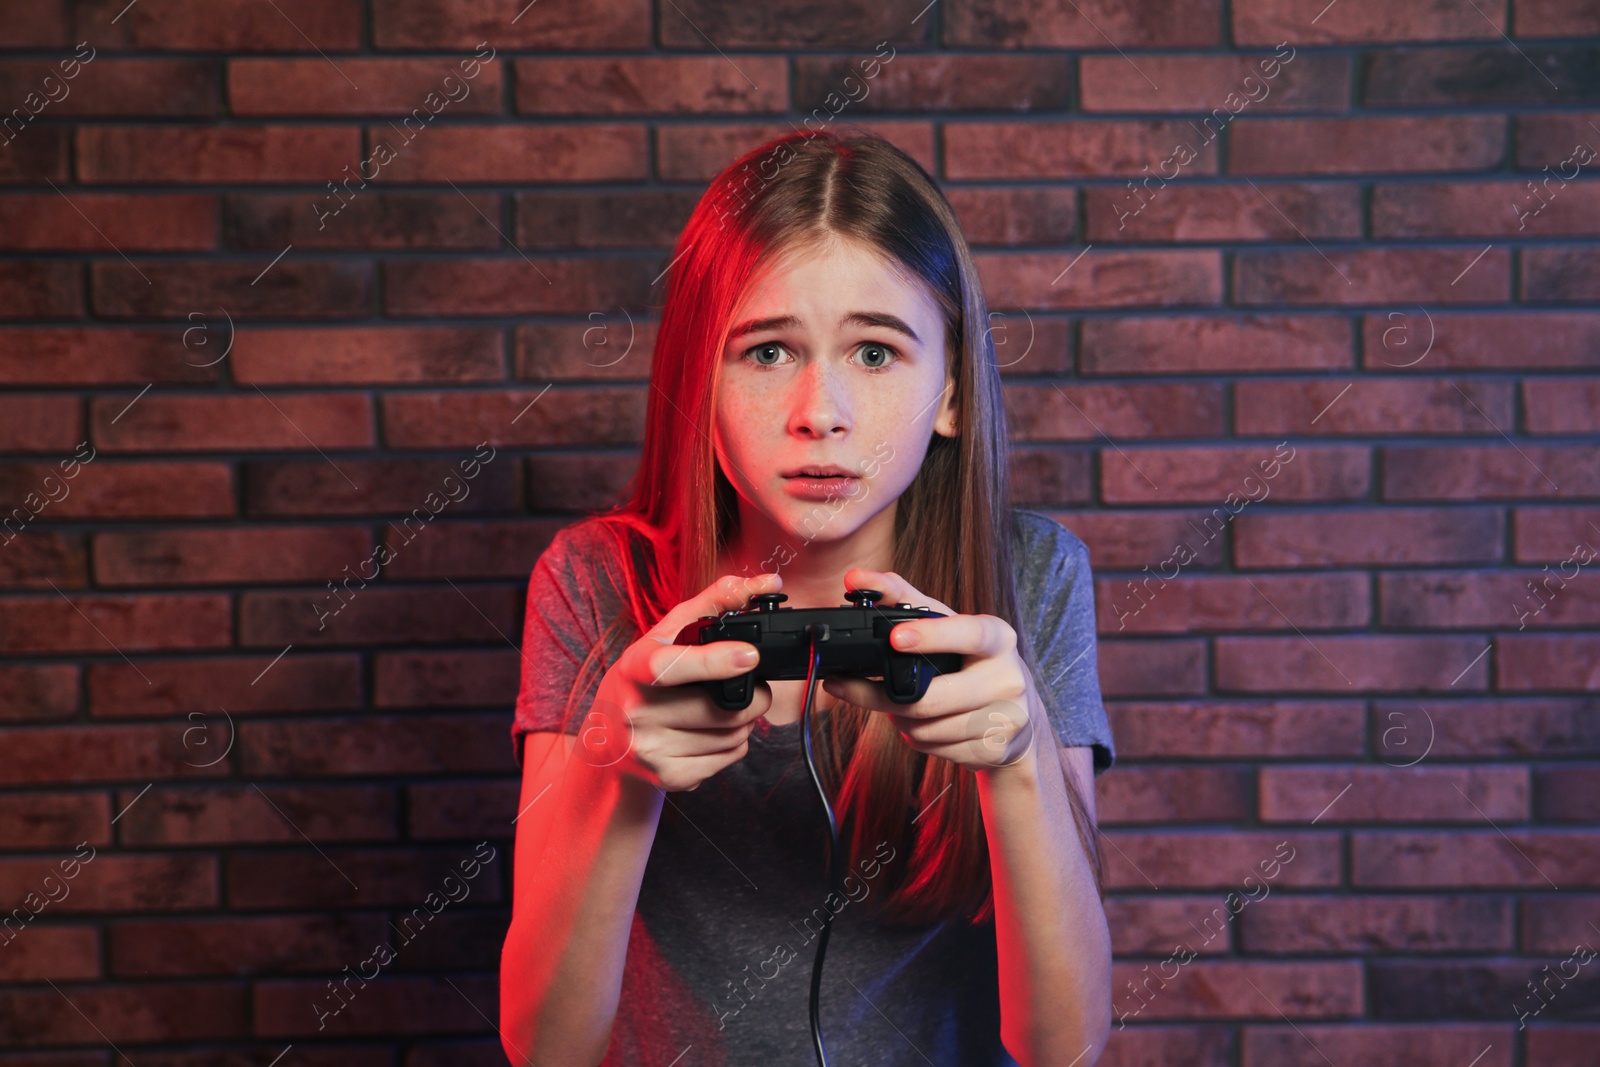 Photo of Teenage girl playing video games with controller near brick wall